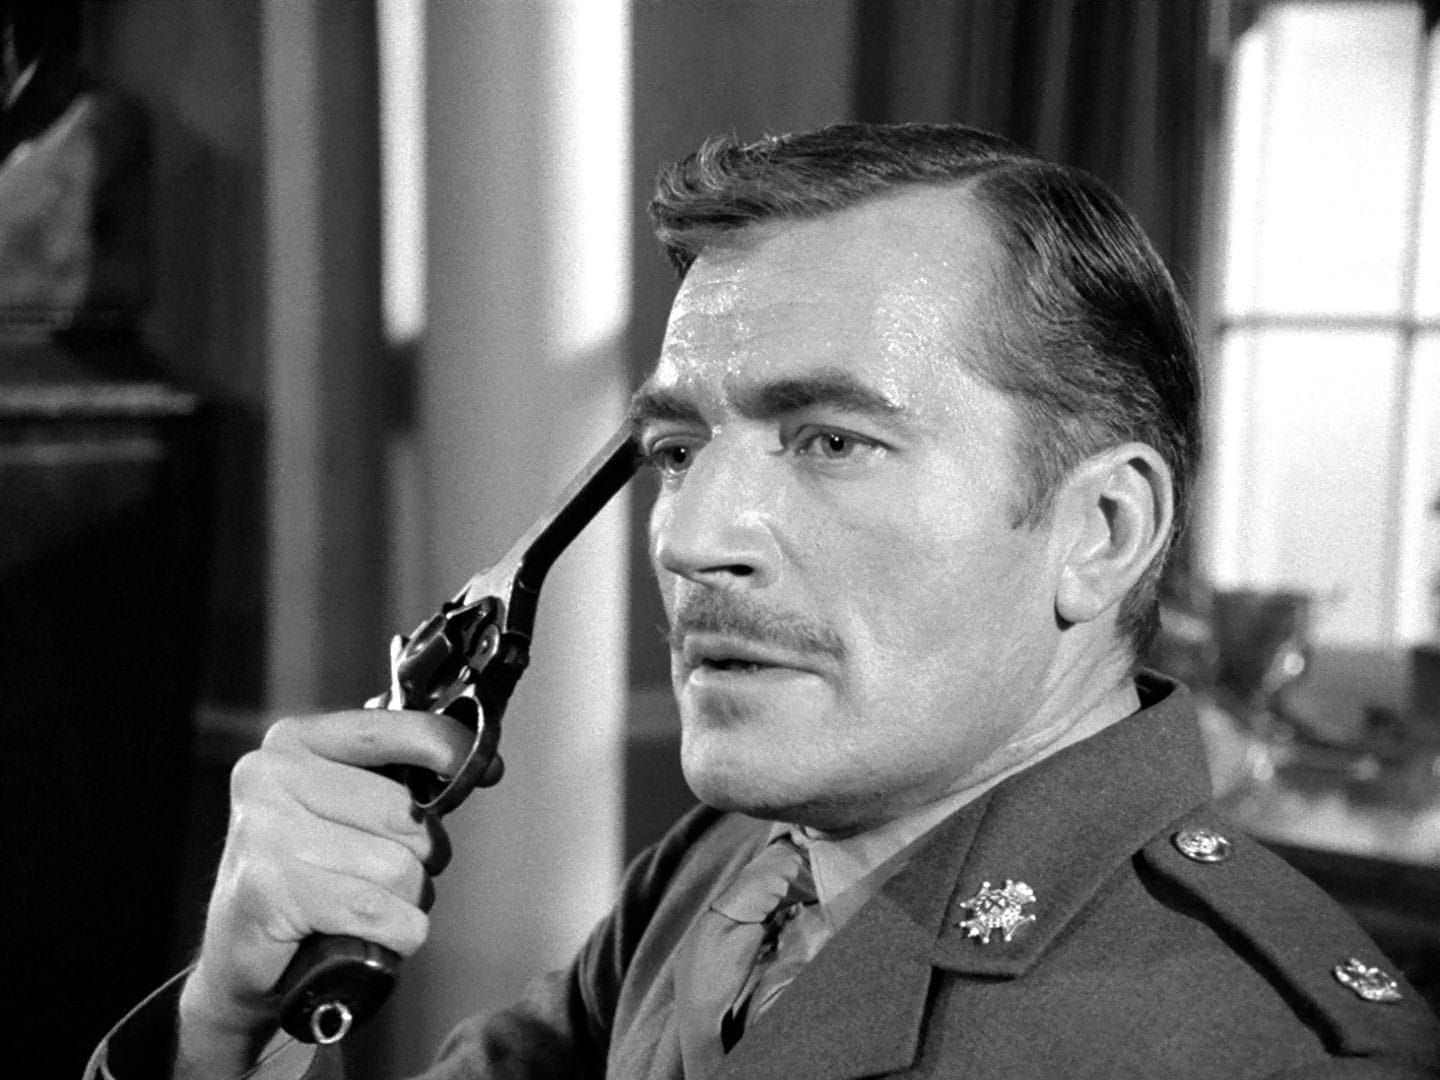 Nigel Davenport with a gun to his head